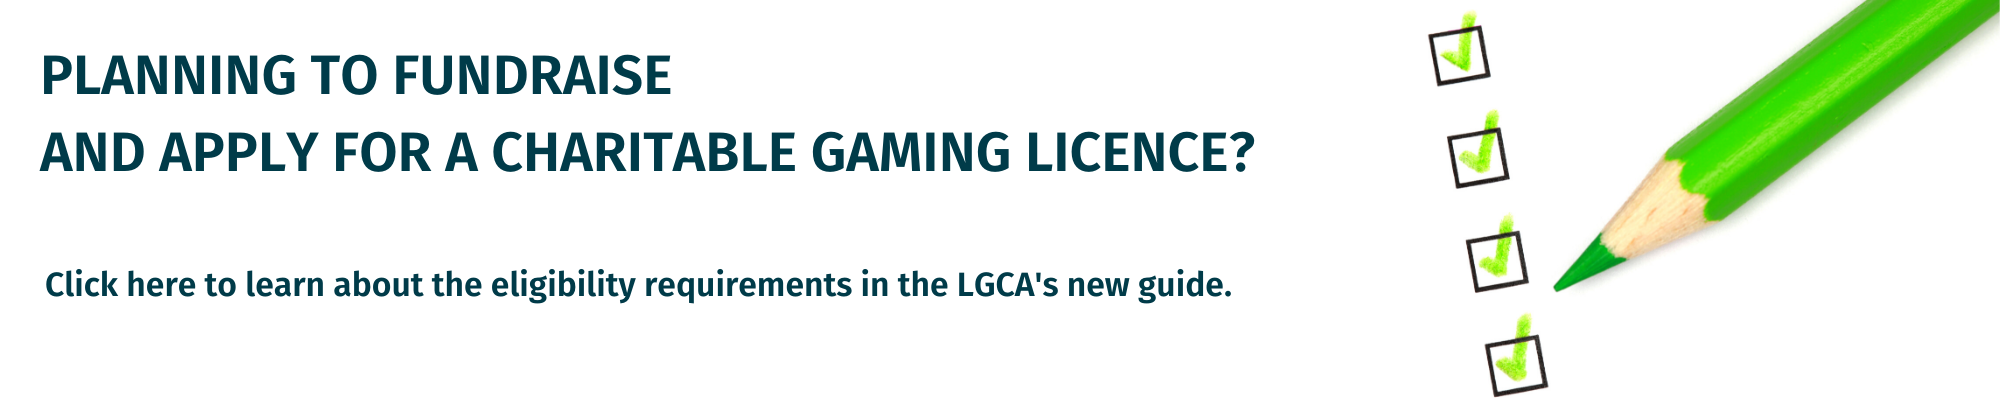 Planning to fundraise and apply for a charitable gaming licence? Click here to view the LGCA's eligibility guide.